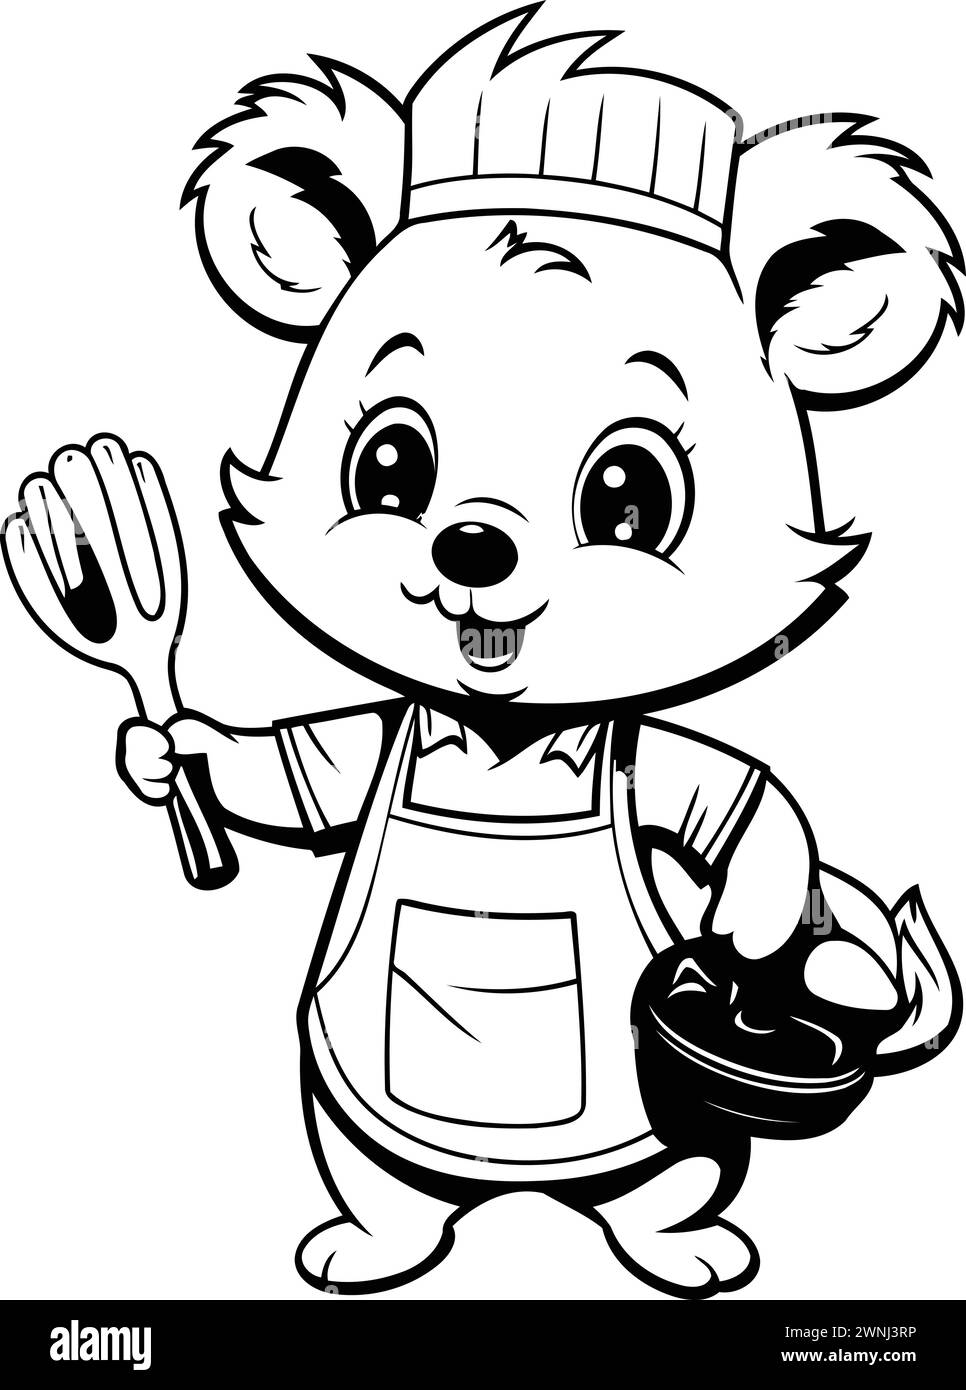 Black and White Cartoon Illustration of Cute Little Bear Chef Character for Coloring Book Stock Vector